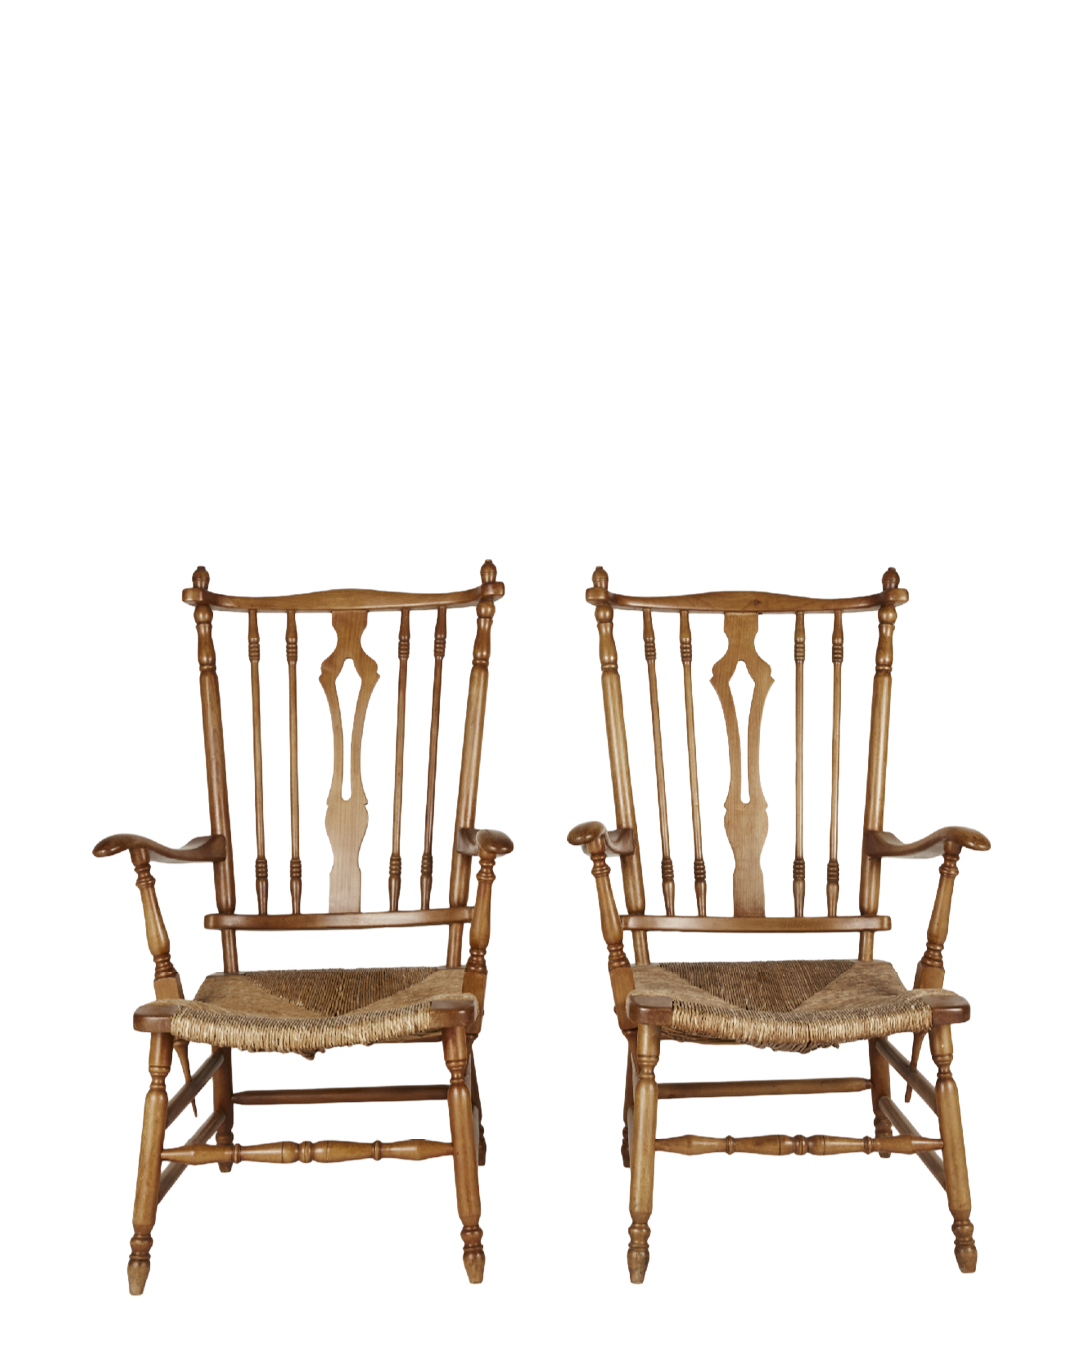 1950s Vintage Chairs